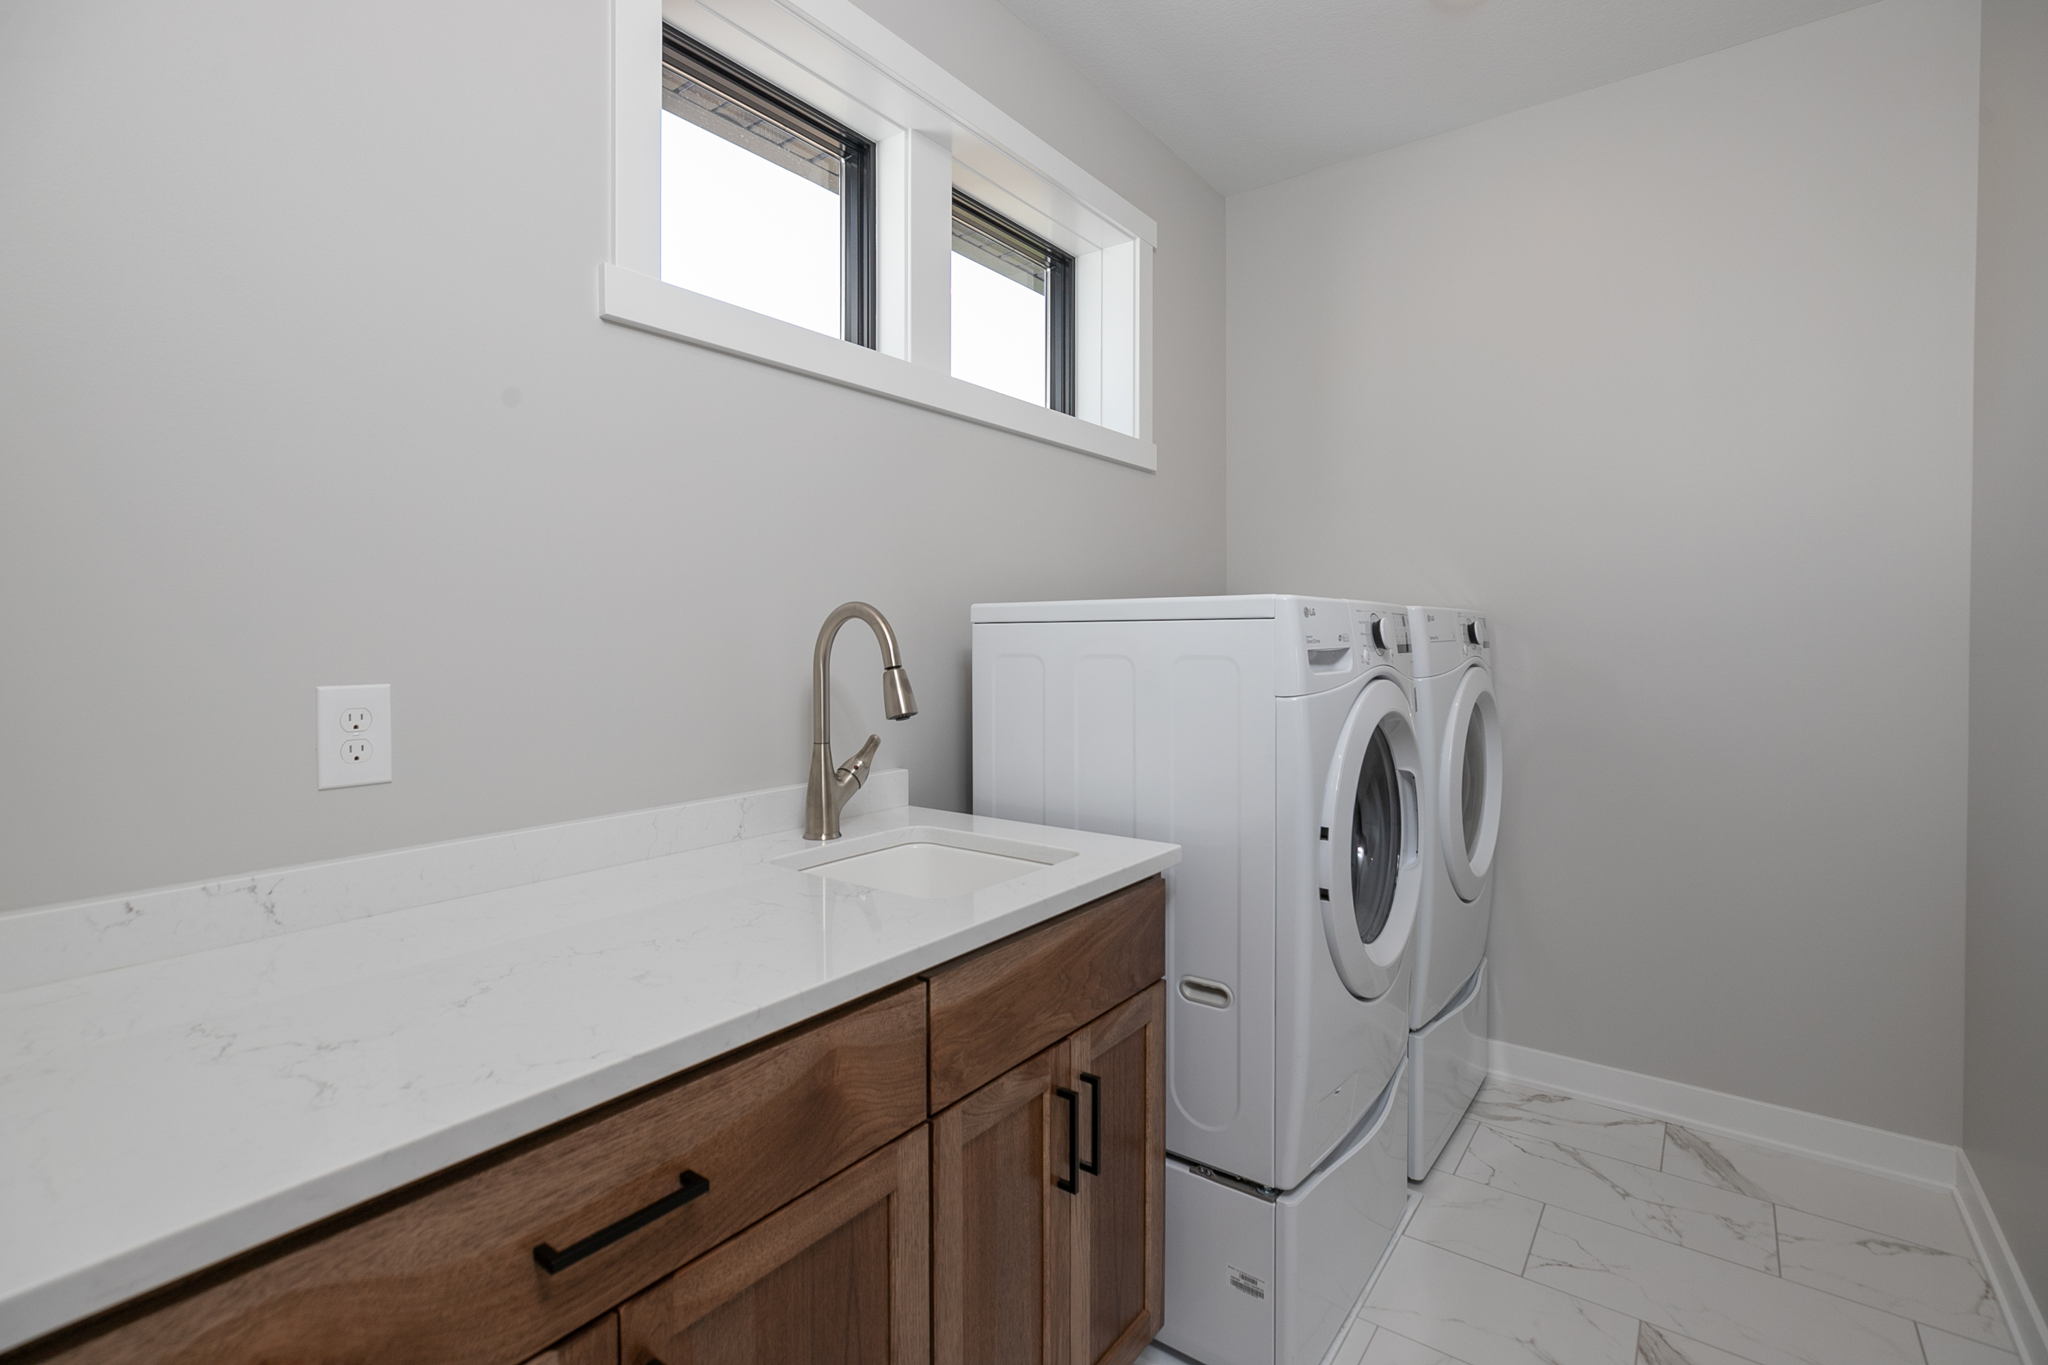 20-web-or-mls-20-Laundry